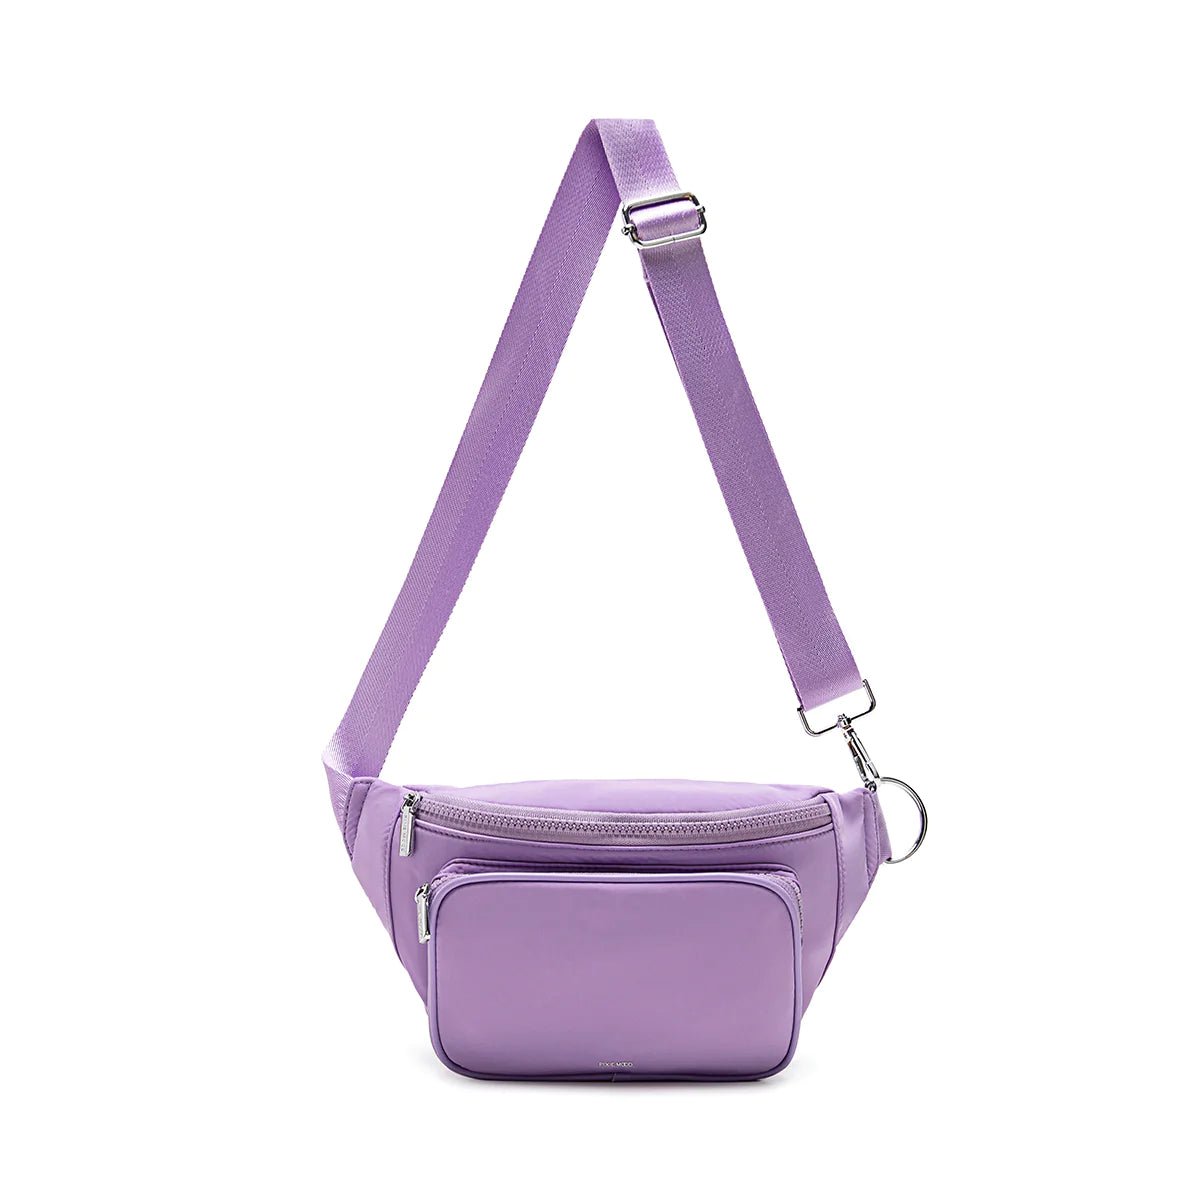 Aaliyah Fanny Pack Lavender Nylon - Blue Sky Fashions & Lingerie